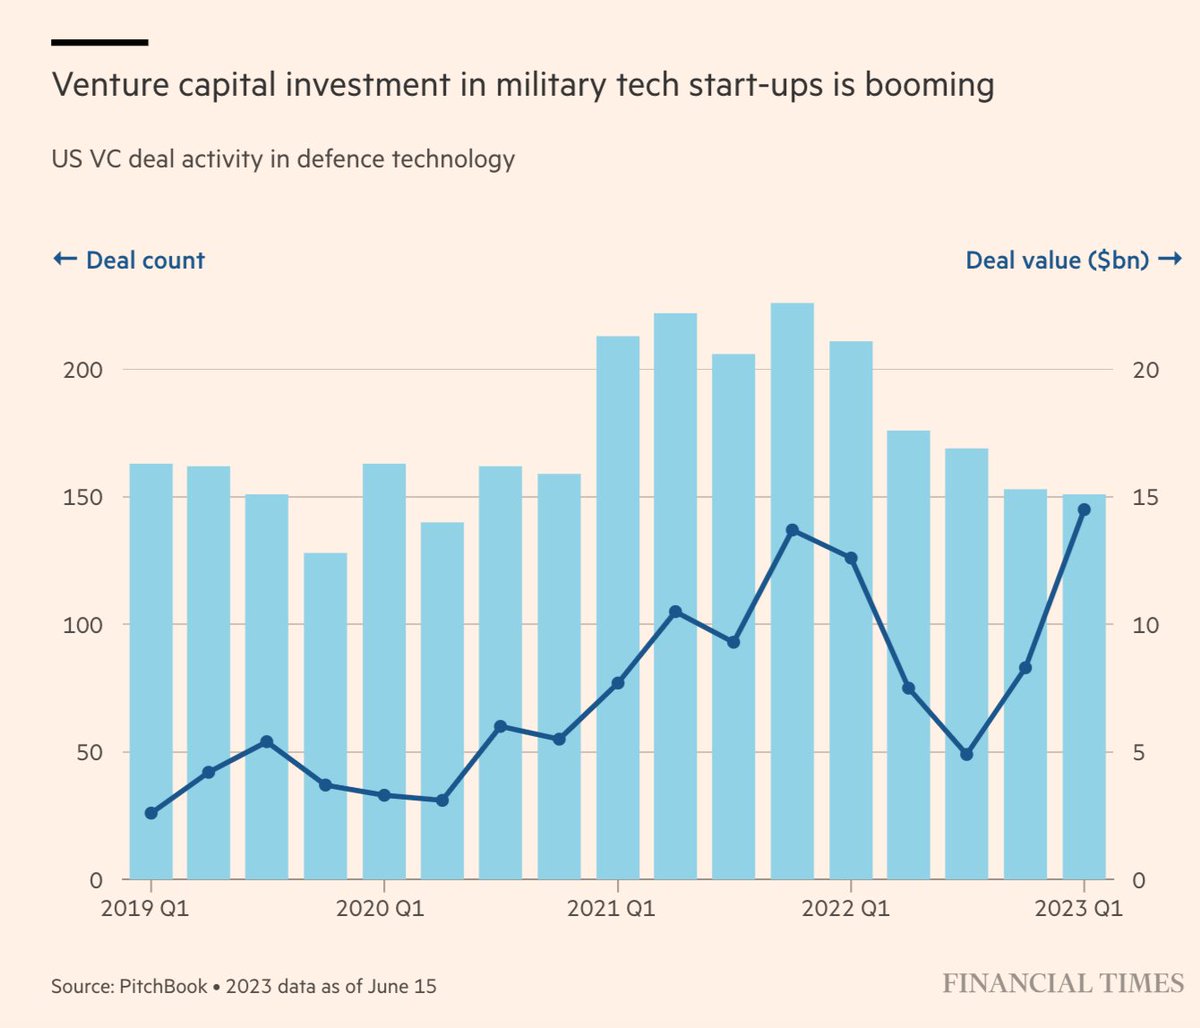 Venture capital investment into defence tech companies has boomed in recent years on hope of US gov contracts. US investment in defence start-ups surged from less than $16bn in 2019 to $33bn in 2023, PitchBook data shows. ft.com/content/45da39…